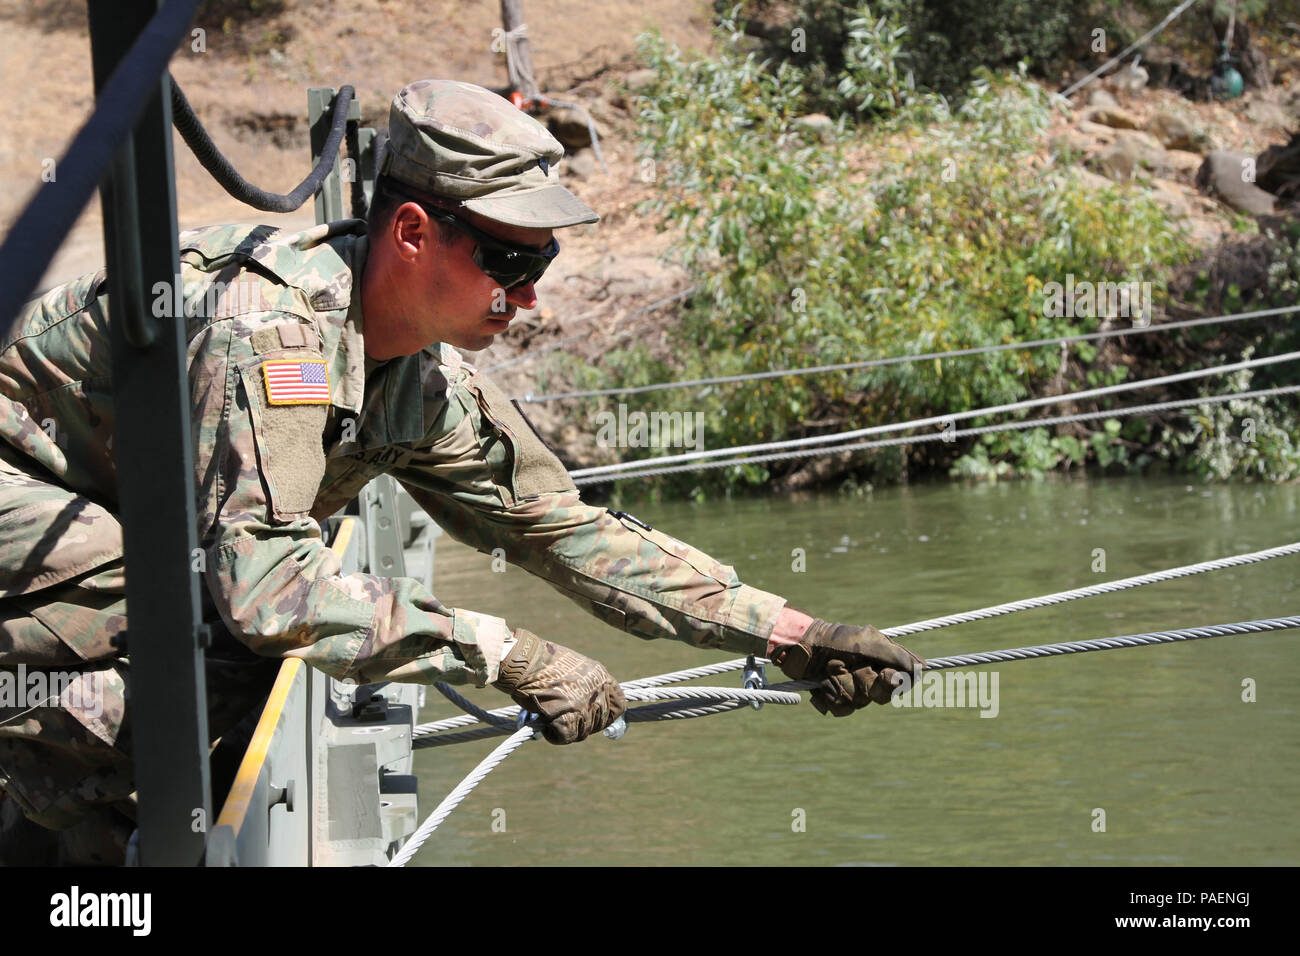 U.S. Army Spc. Michael Fereira of the 132nd Multirole Bridge Company, 579th Engineer Battalion, 49th Military Police Brigade, California Army National Guard, checks the tension of a wire cable July 13 at Cache Creek Regional Park, California, where the 132nd constructed a temporary floating bridge to support the California Department of Forestry and Fire Protection (CAL FIRE) efforts to battle Northern California wildfires. This is the second time the CalGuard unit was summoned for a state mission to support CAL FIRE. (U.S. Army National Guard photo by Staff Sgt. Eddie Siguenza) Stock Photo